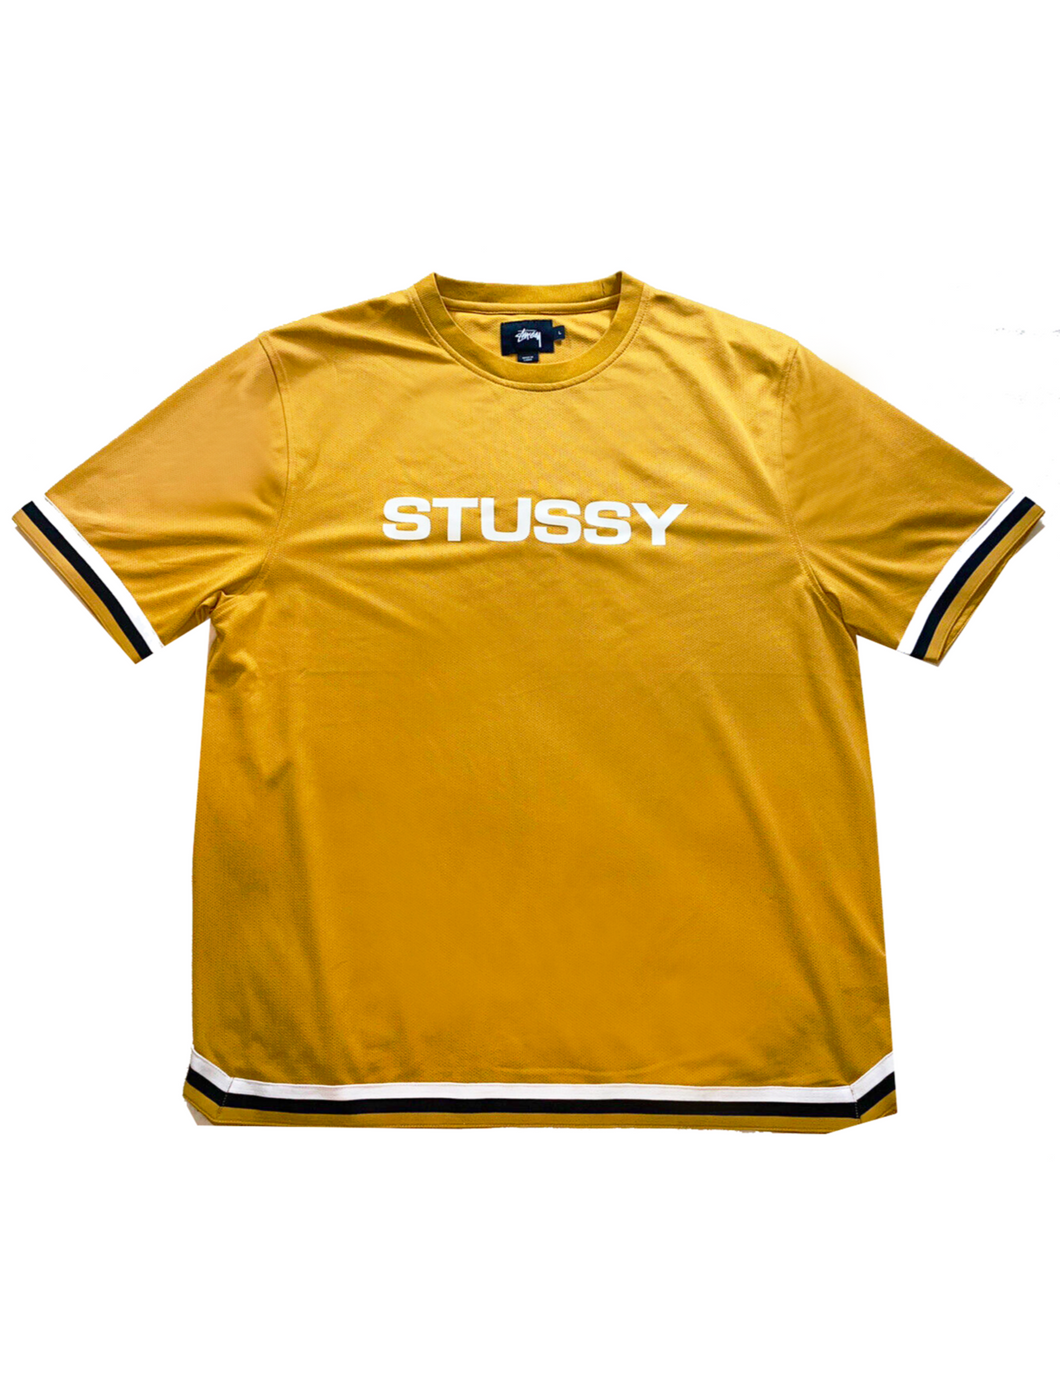 Stussy Brown Perforated Jersey Shortsleeve